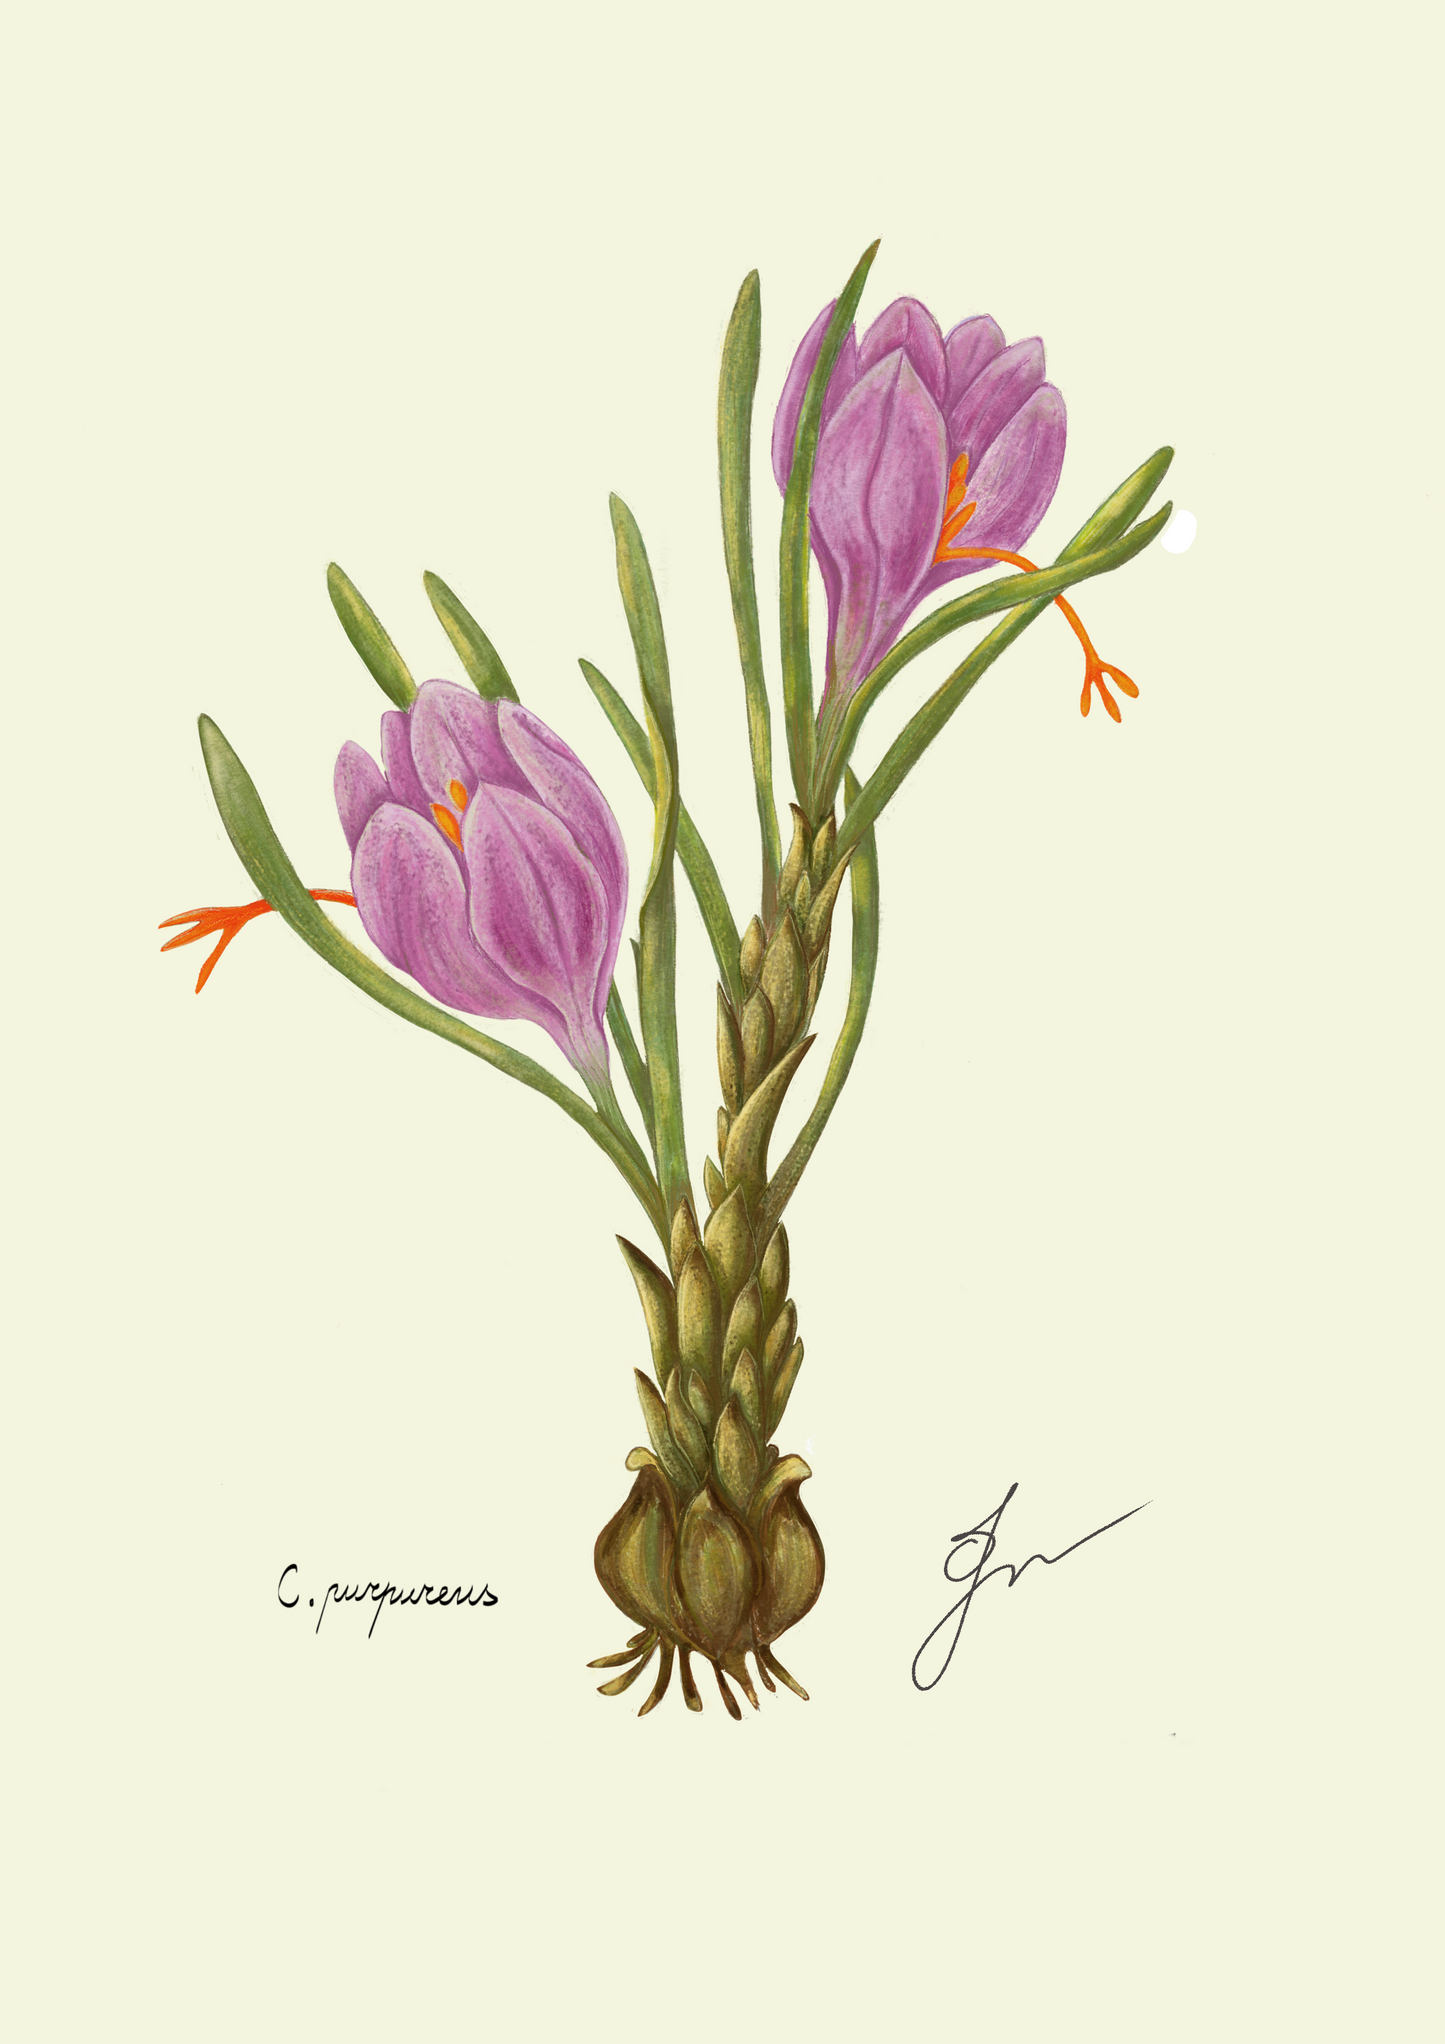 Crocus Art Print A4 for the Spring Flower Collection